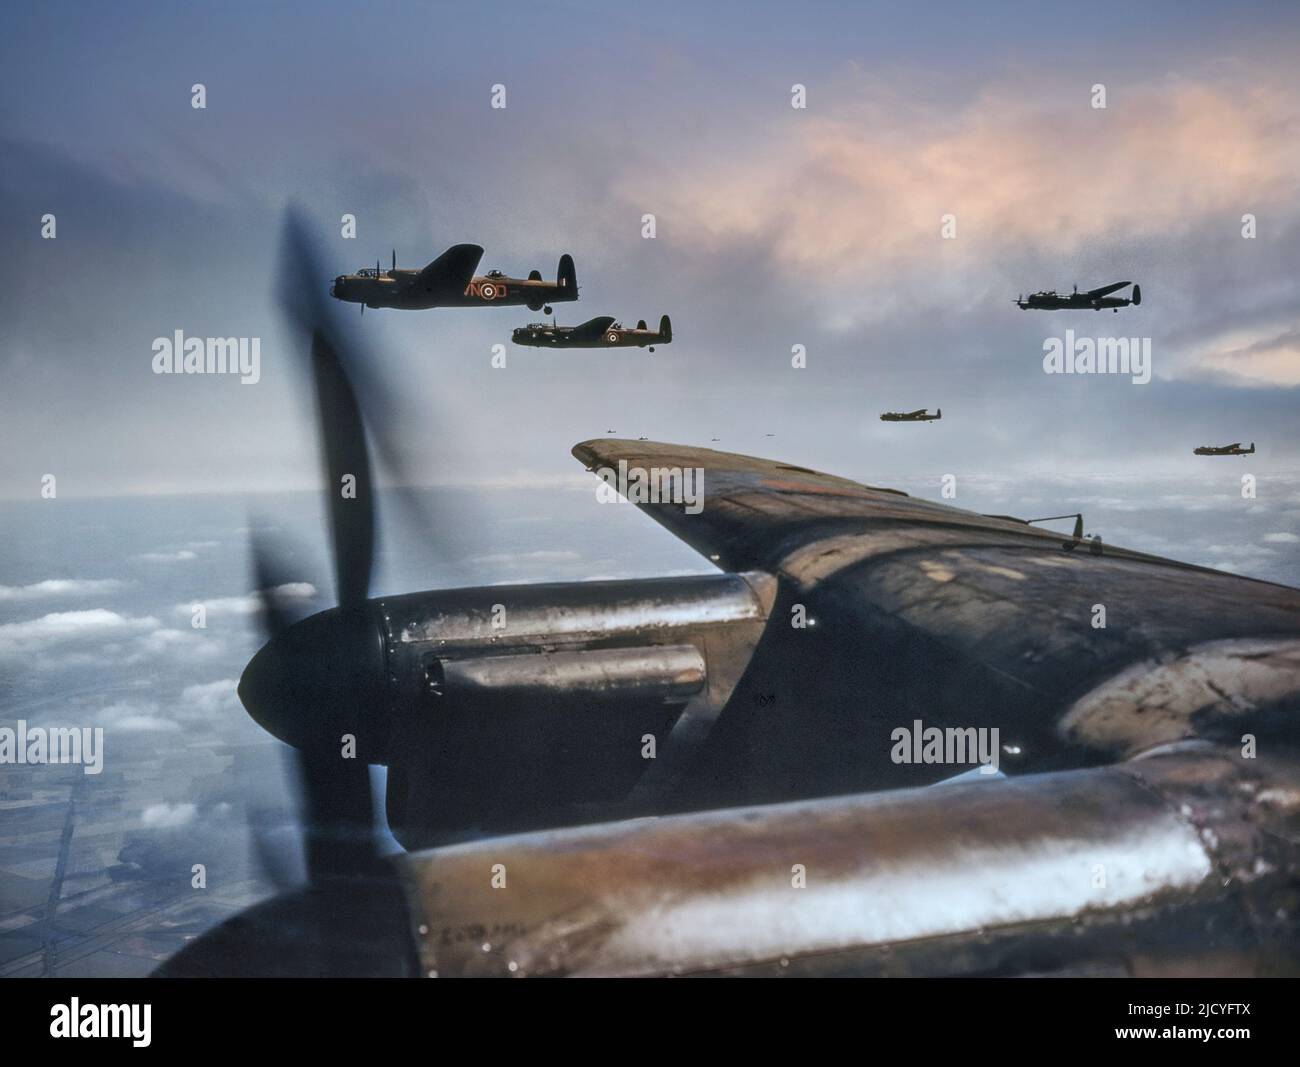 LANCASTER BOMBERS FORMATION BOMBING RUN 1940s WW2 WAR Bomber Command with Avro Lancaster Bombers in-flight en route to Nazi Germany August 1943 No. 50 Squadron, Royal Air Force, based at Skellingthorpe, flying in spread formation. World War II Second World War Great Britain UK Stock Photo